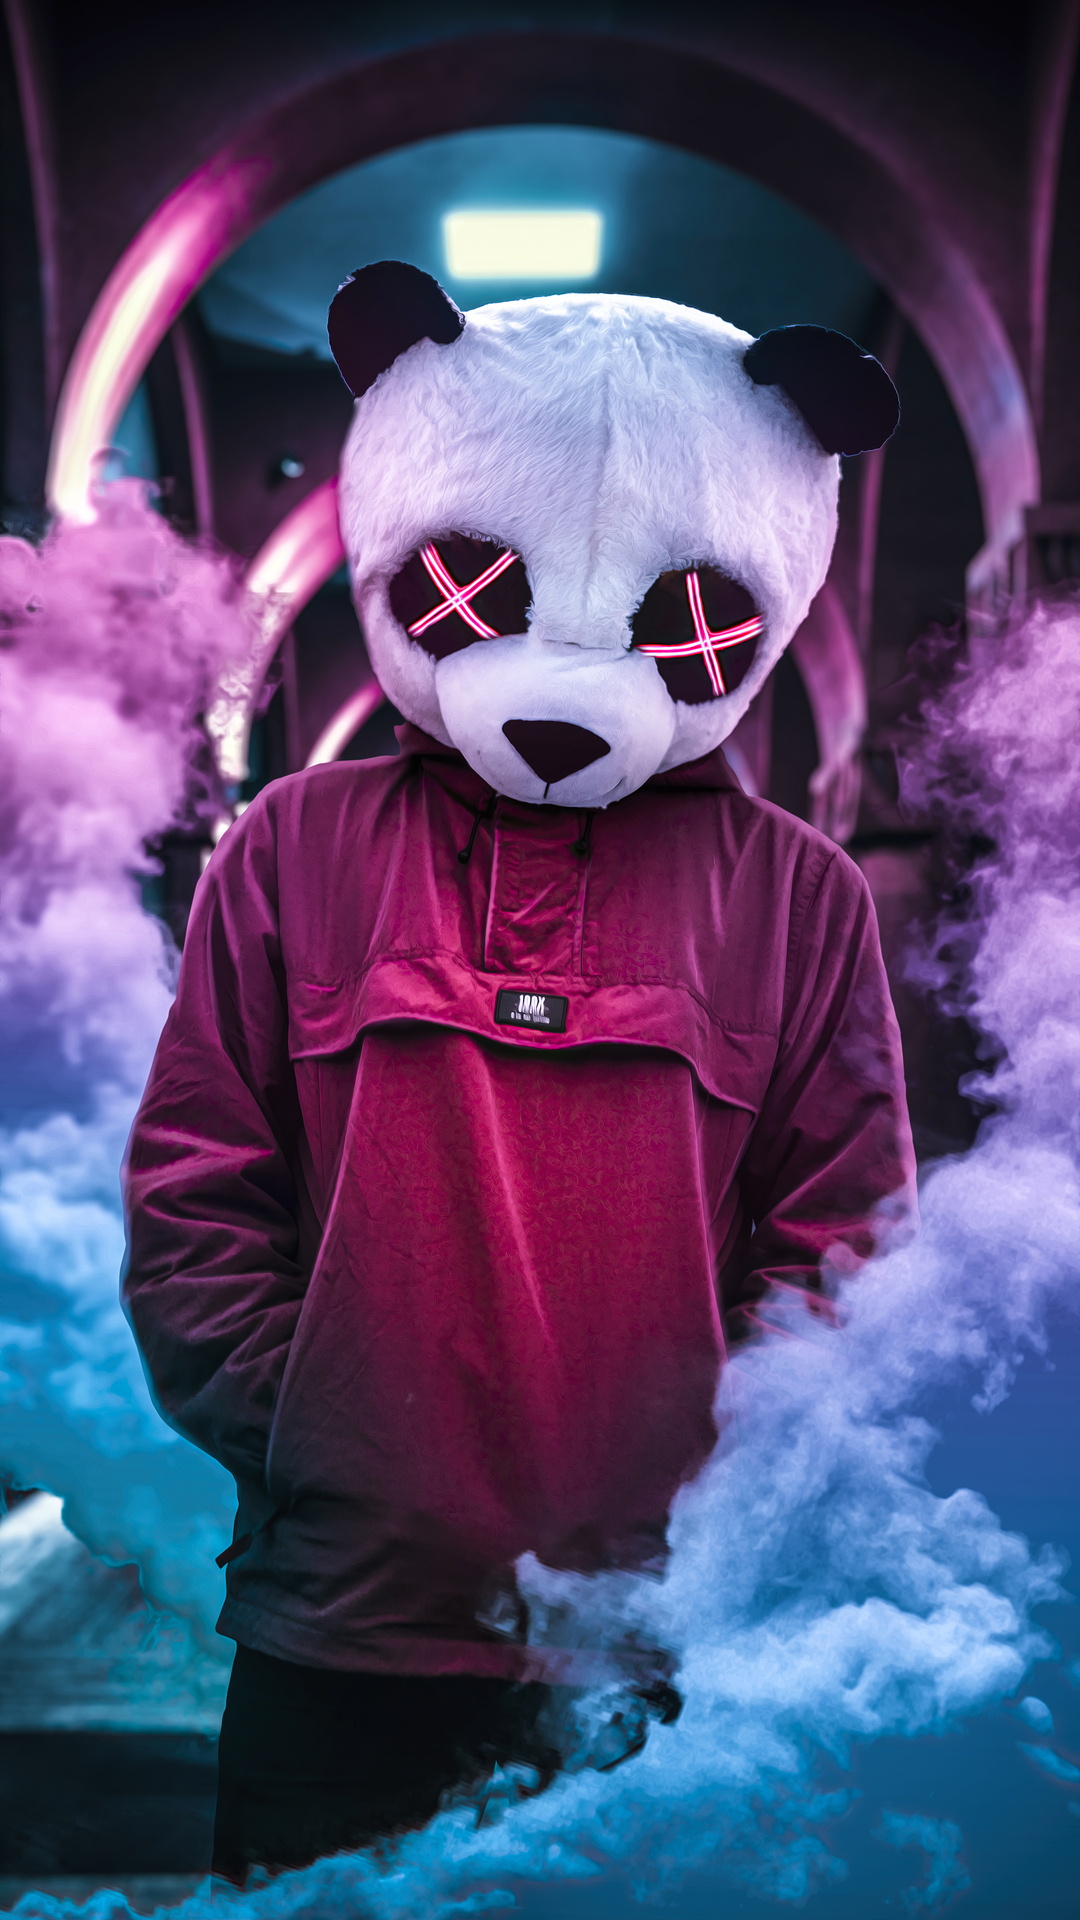 Panda Neon Eyes 4k iPhone 6s, 6 Plus, Pixel xl , One Plus 3t, 5 HD 4k Wallpaper, Image, Background, Photo and Picture